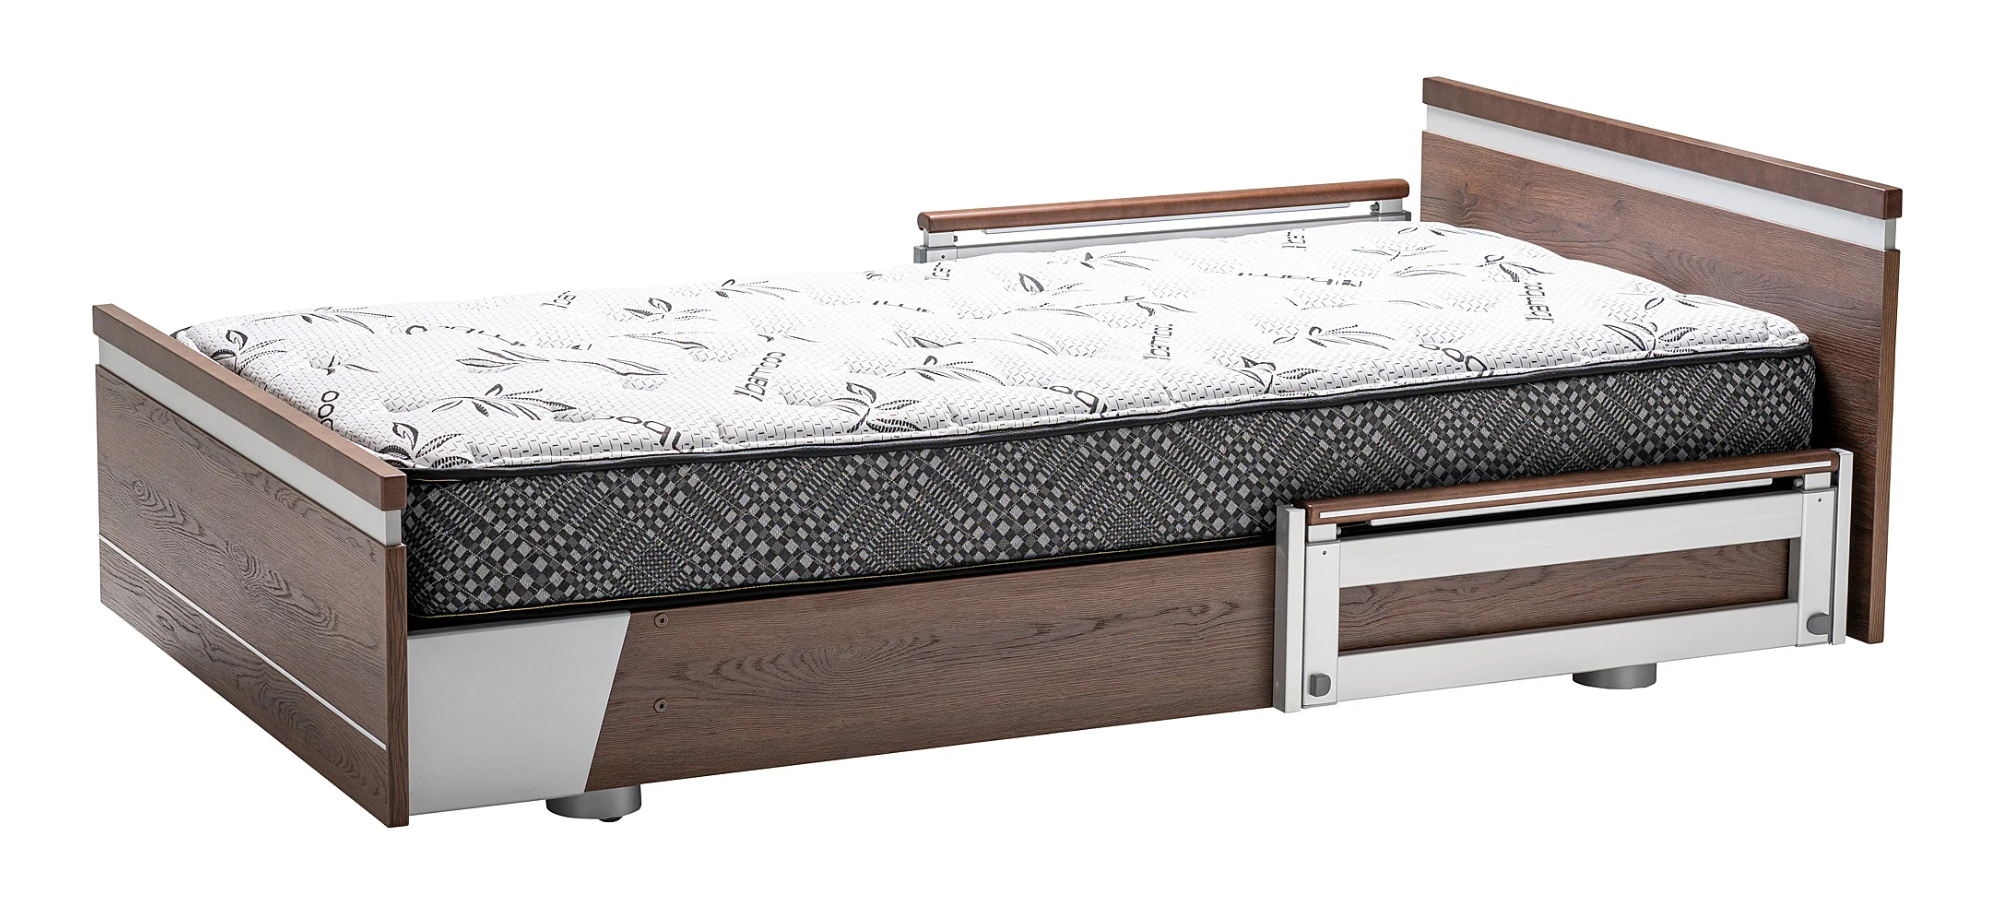 hospital bed Missouri Home Hospital Beds in Missouri | Buy Hospital Bed Missouri